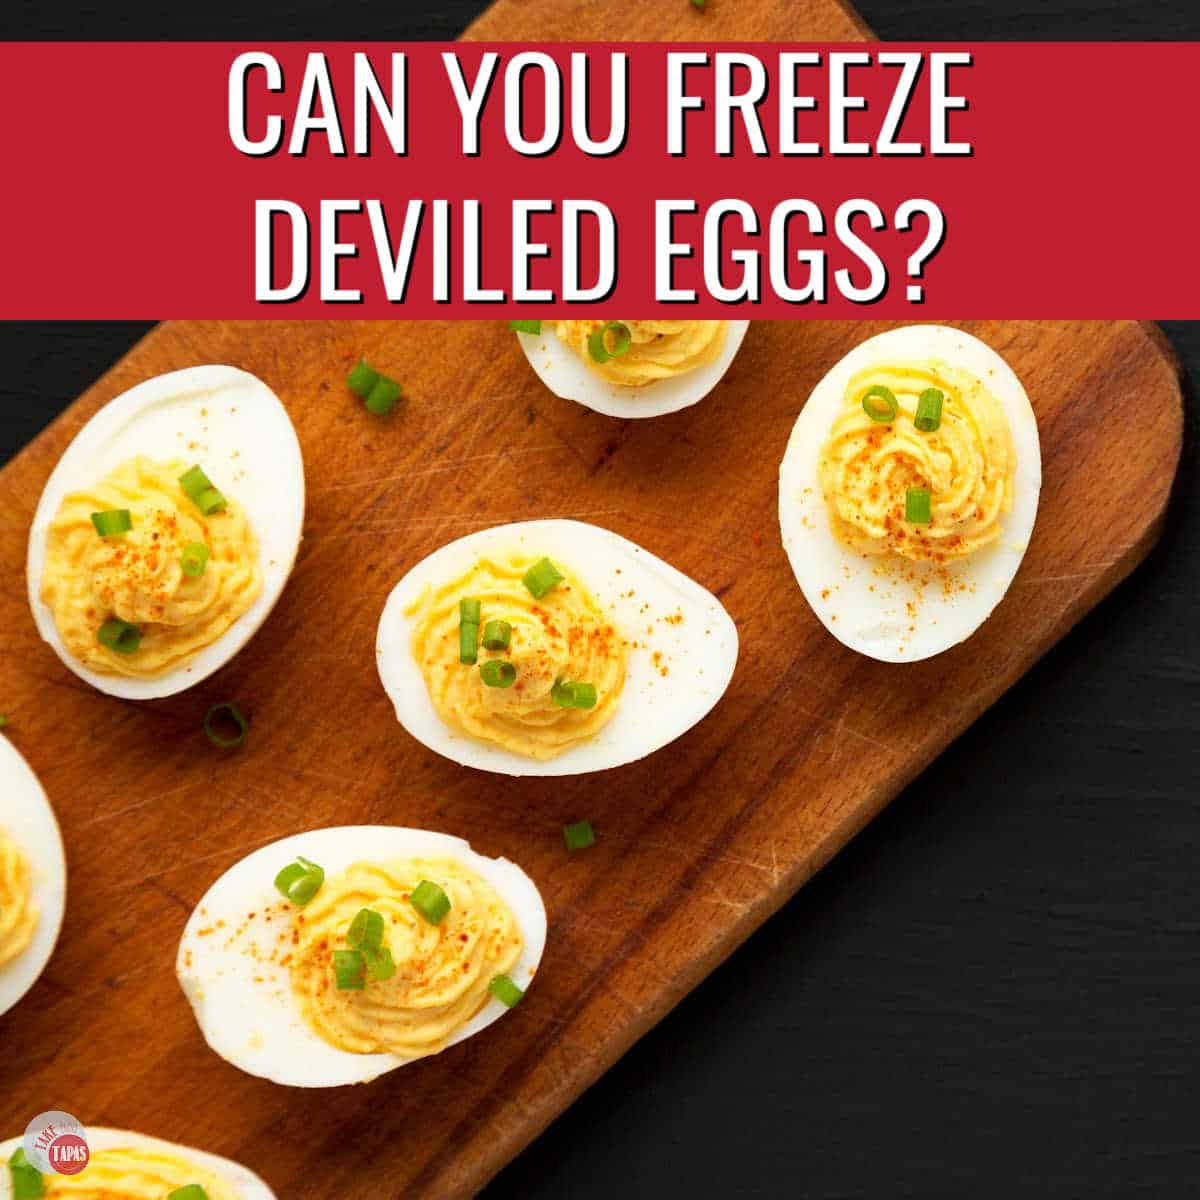 deviled eggs on a wood plank with red banner and white text